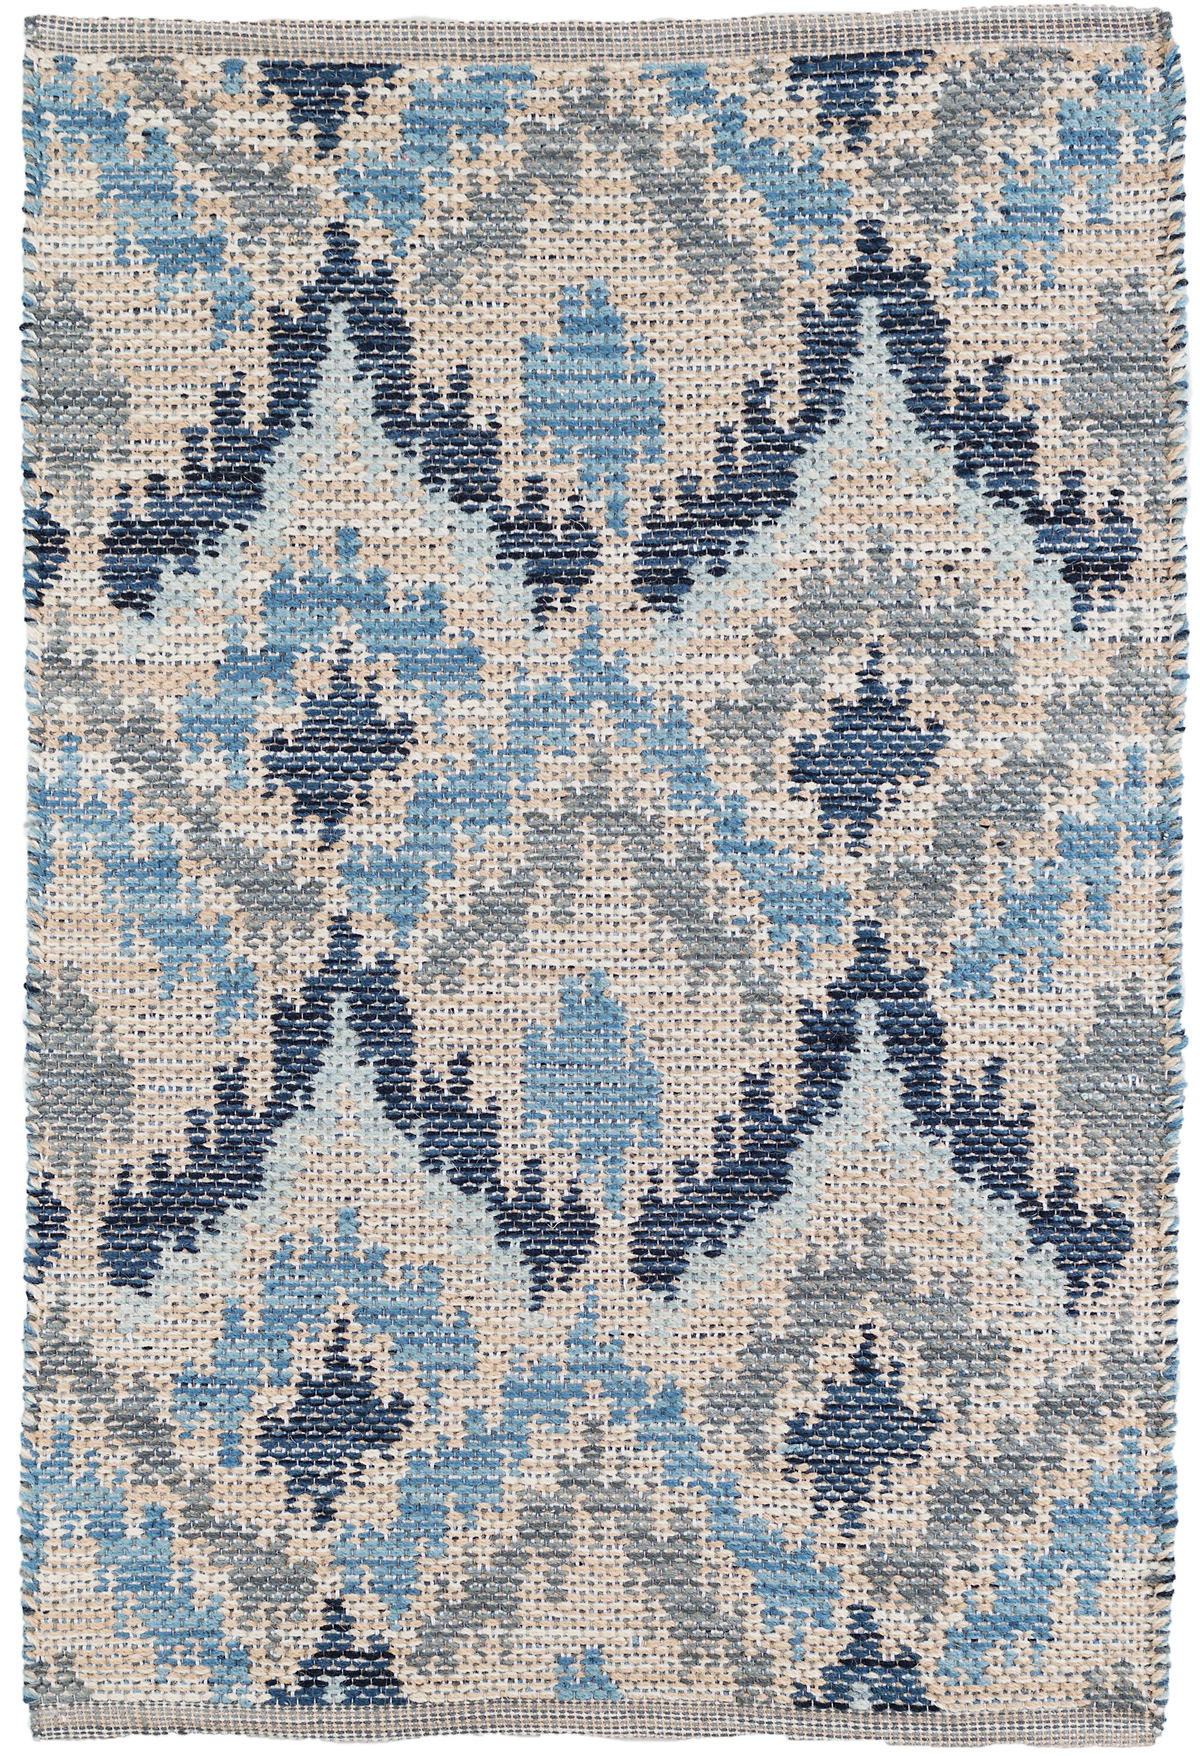 Medina Blue Jacquard Woven Wool Rug, Are Wool Rugs Good For High Traffic Areas